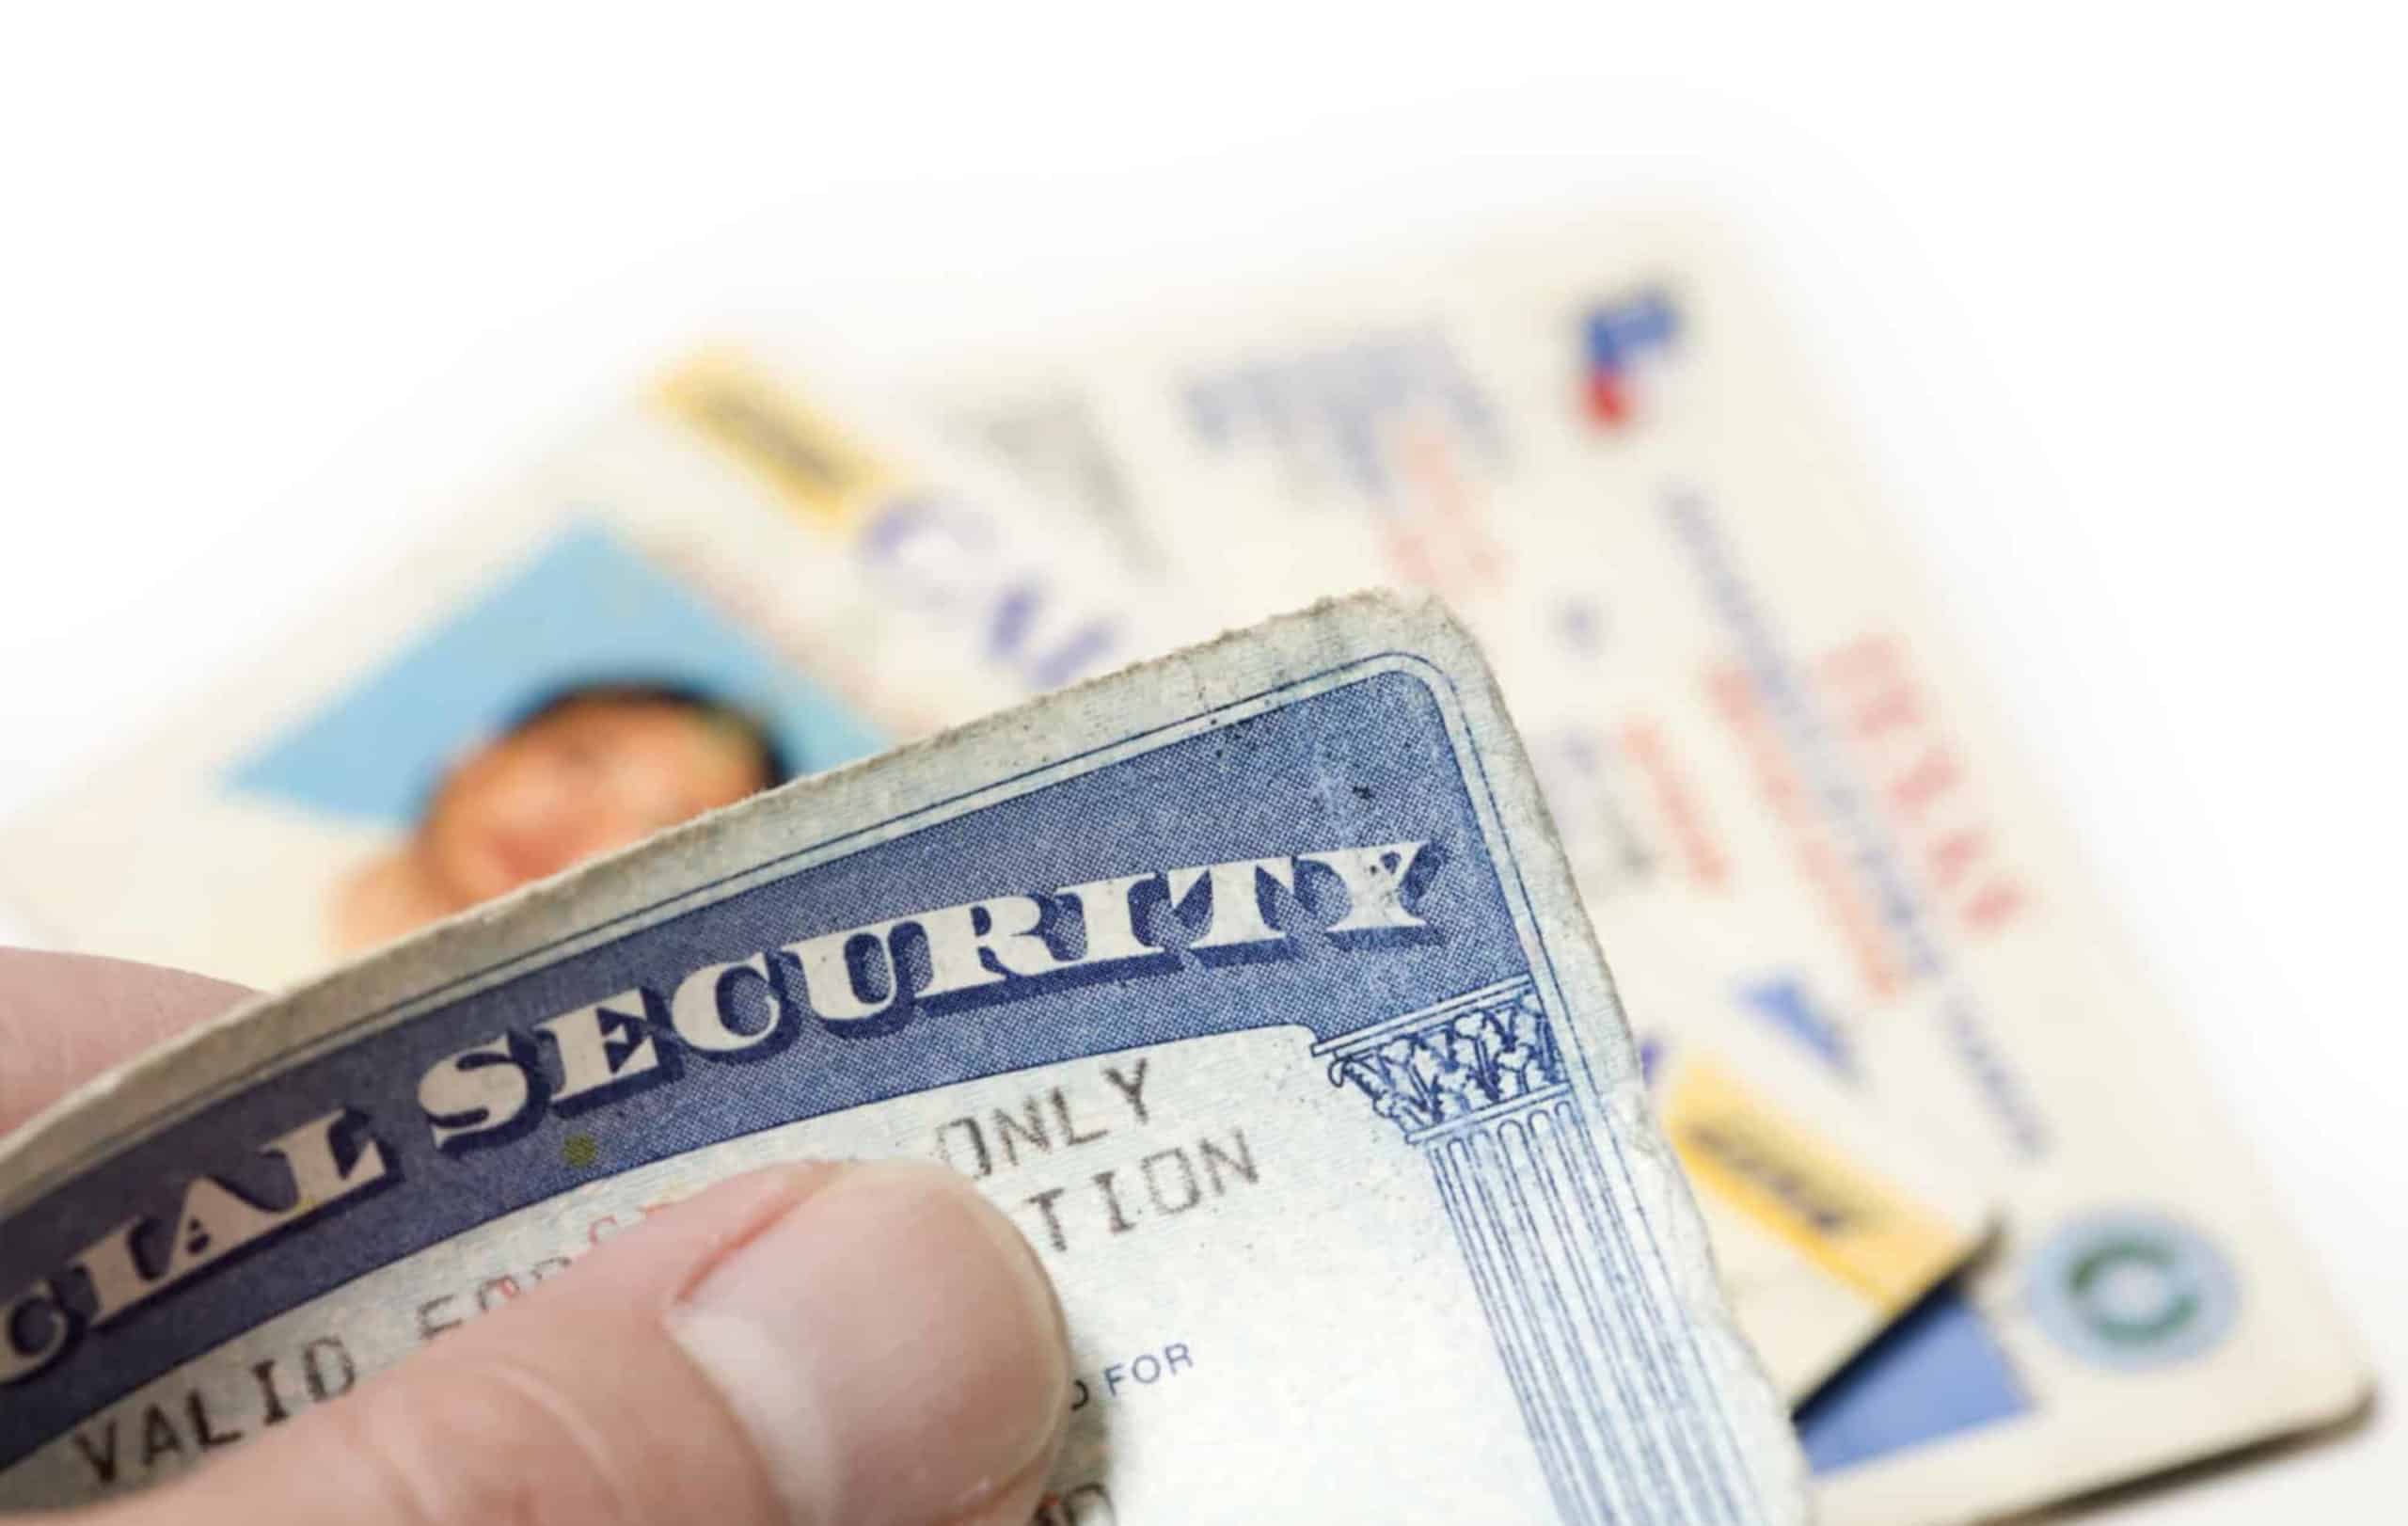 Man holding Identity theft documents-social security card, drivers license, voter registration card.